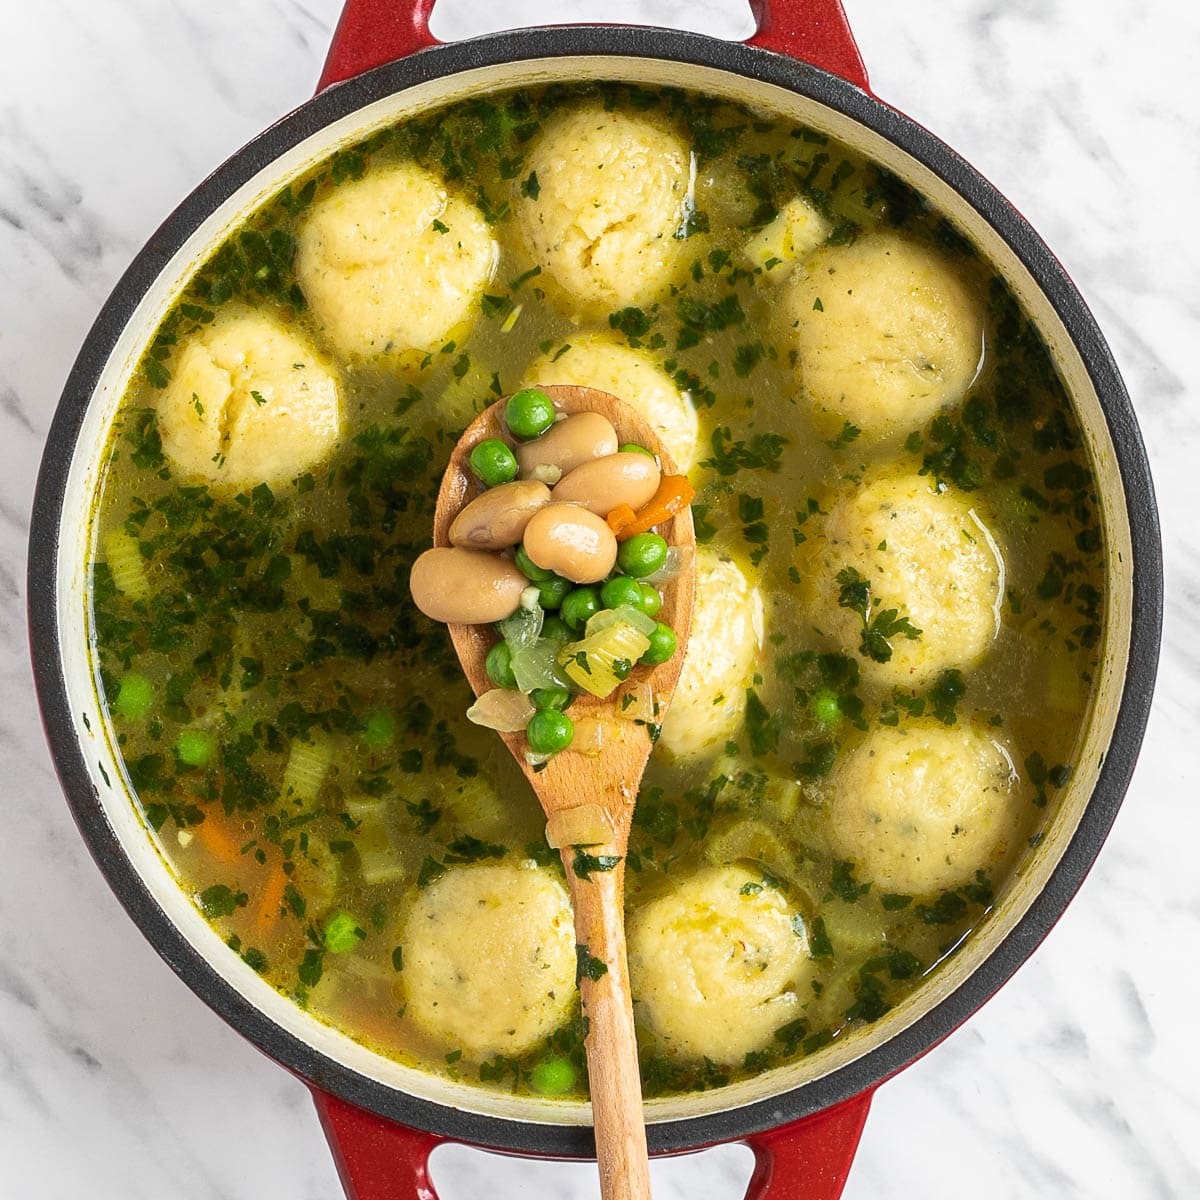 Dutch oven with dumplings, chopped veggies and green herbs in a light vegetable broth. A wooden spoon is holding white beans and green peas to be added.